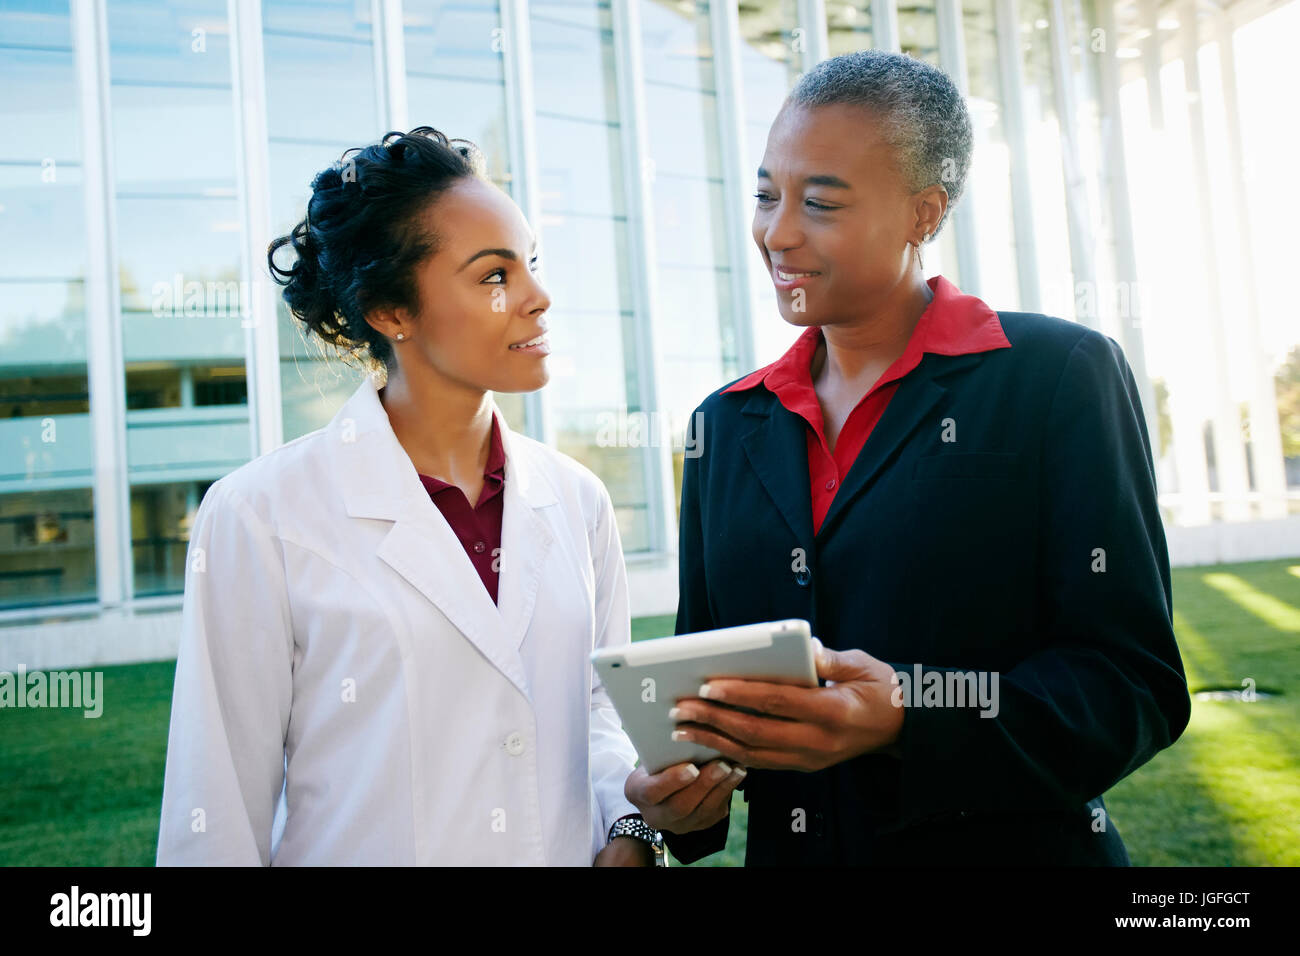 Doctor and administrator outdoors at hospital using digital tablet Stock Photo